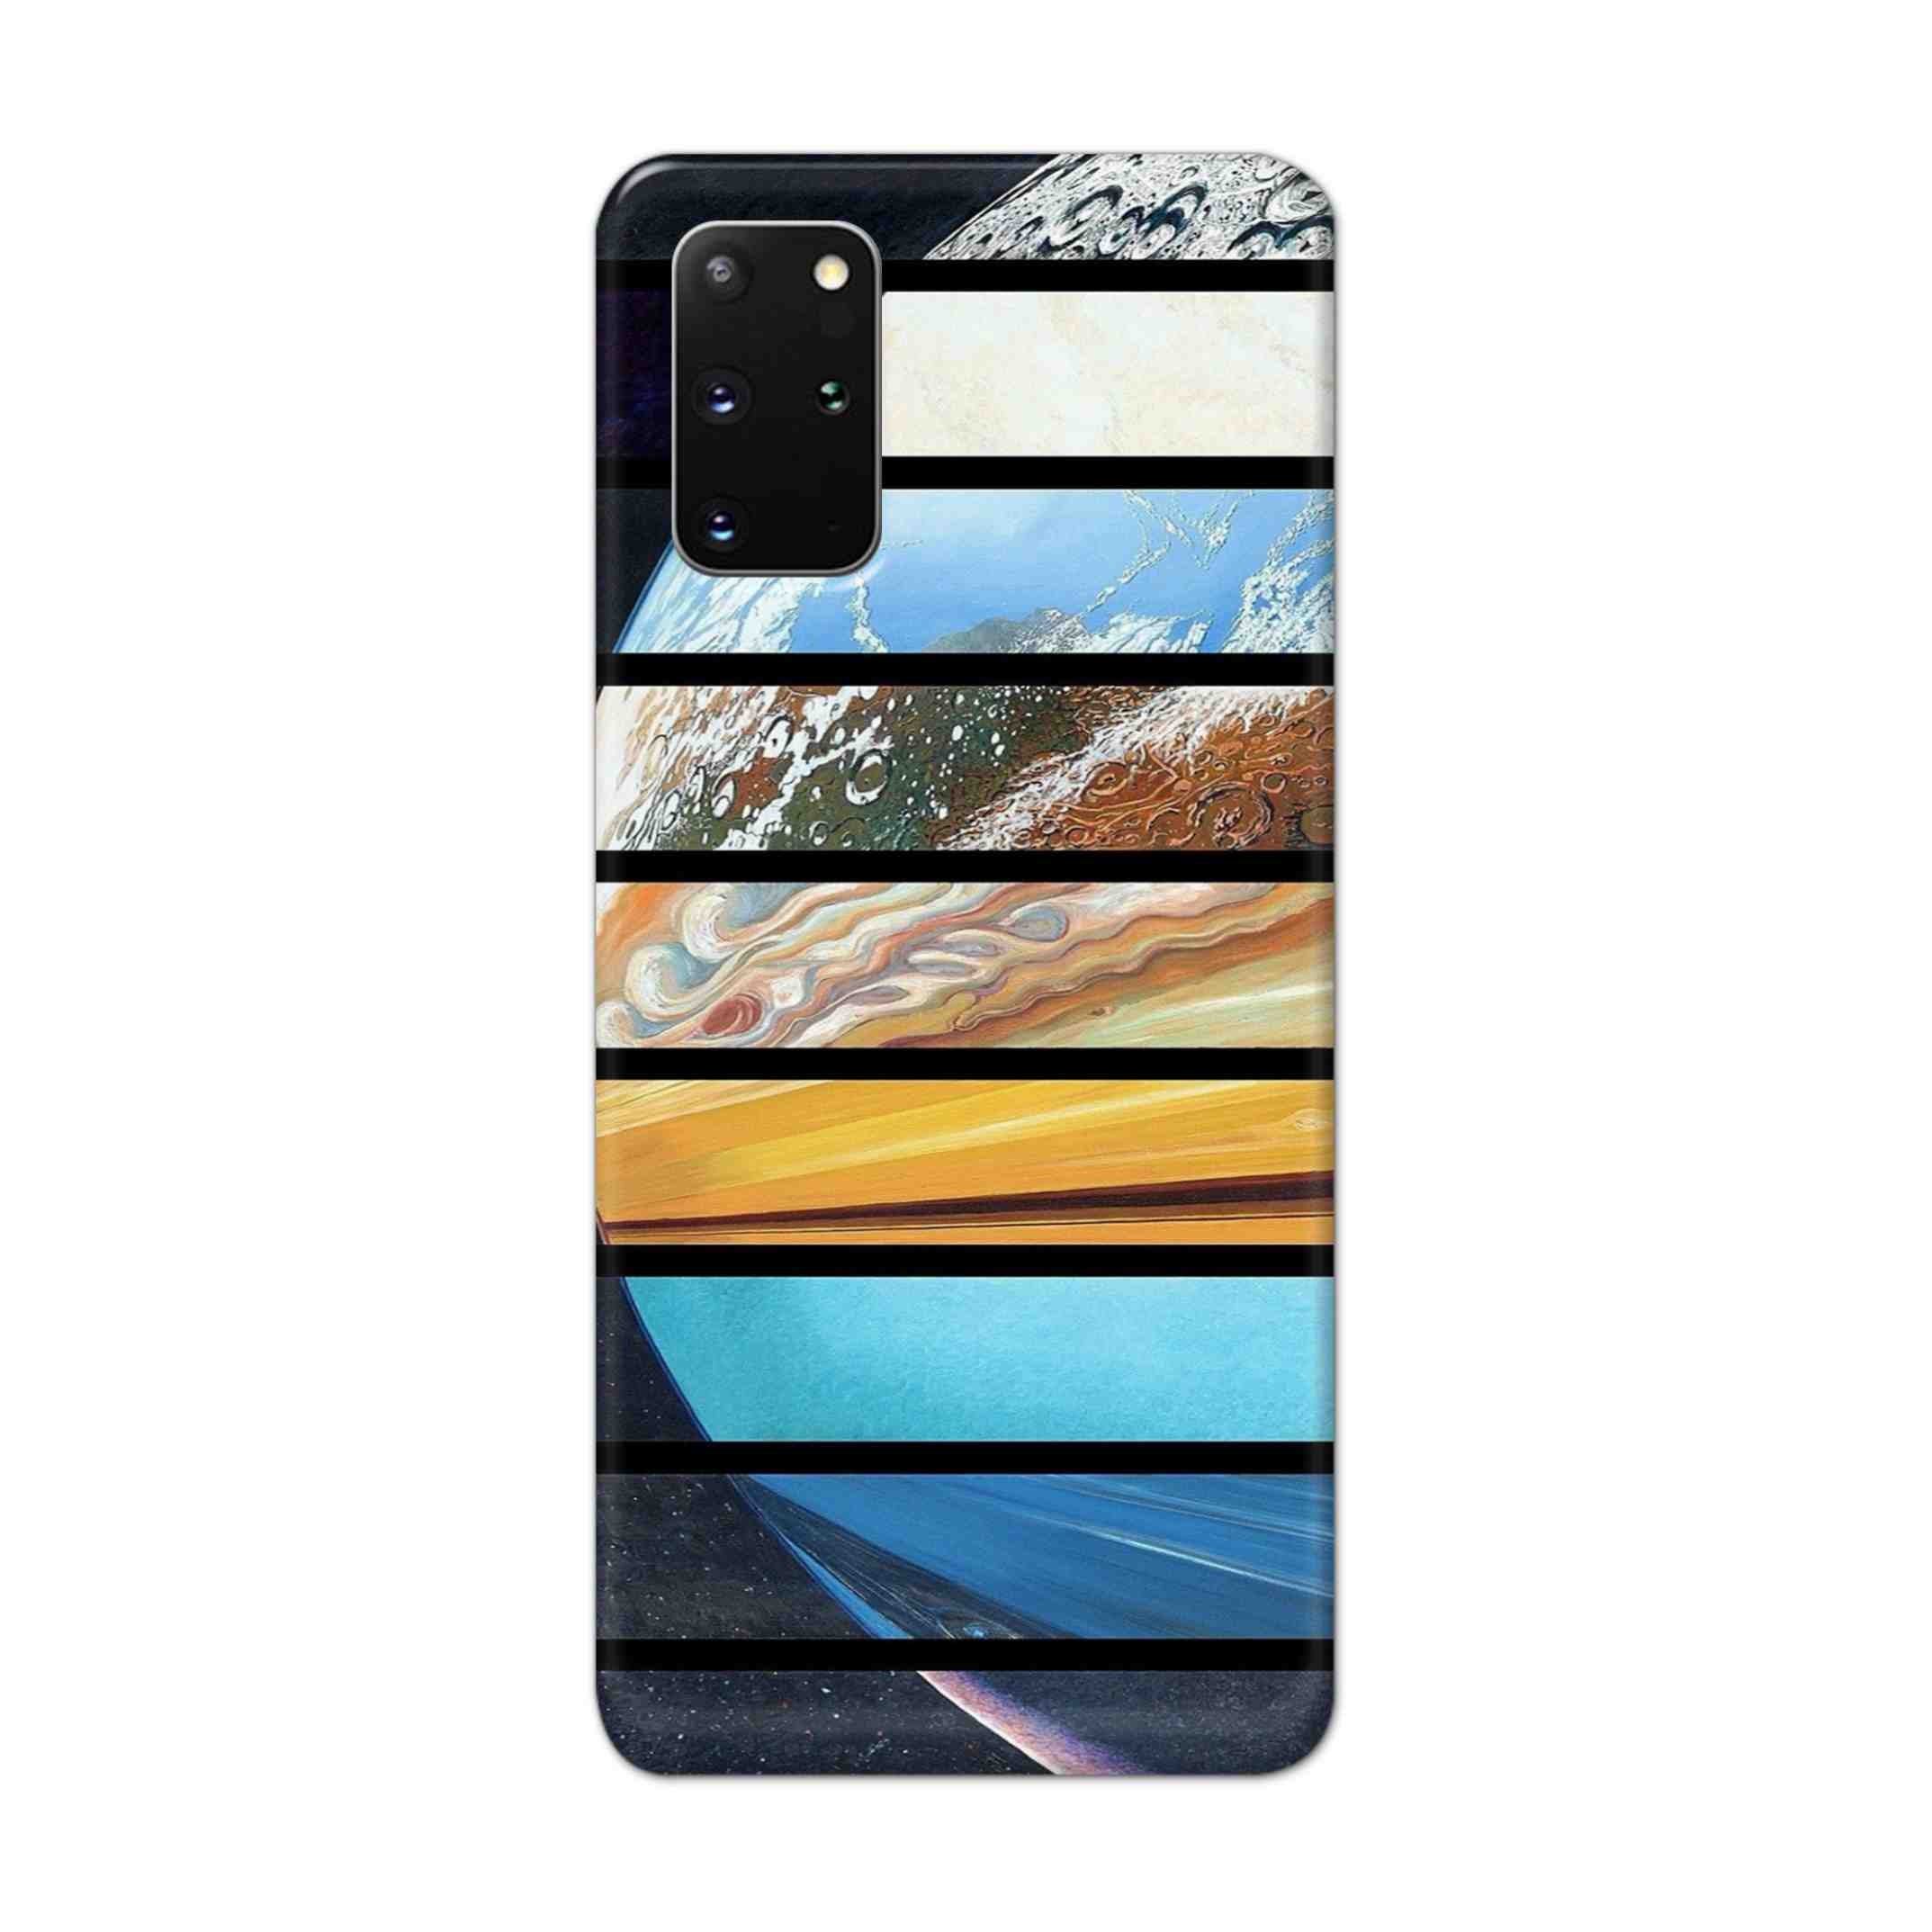 Buy Colourful Earth Hard Back Mobile Phone Case Cover For Samsung Galaxy S20 Plus Online